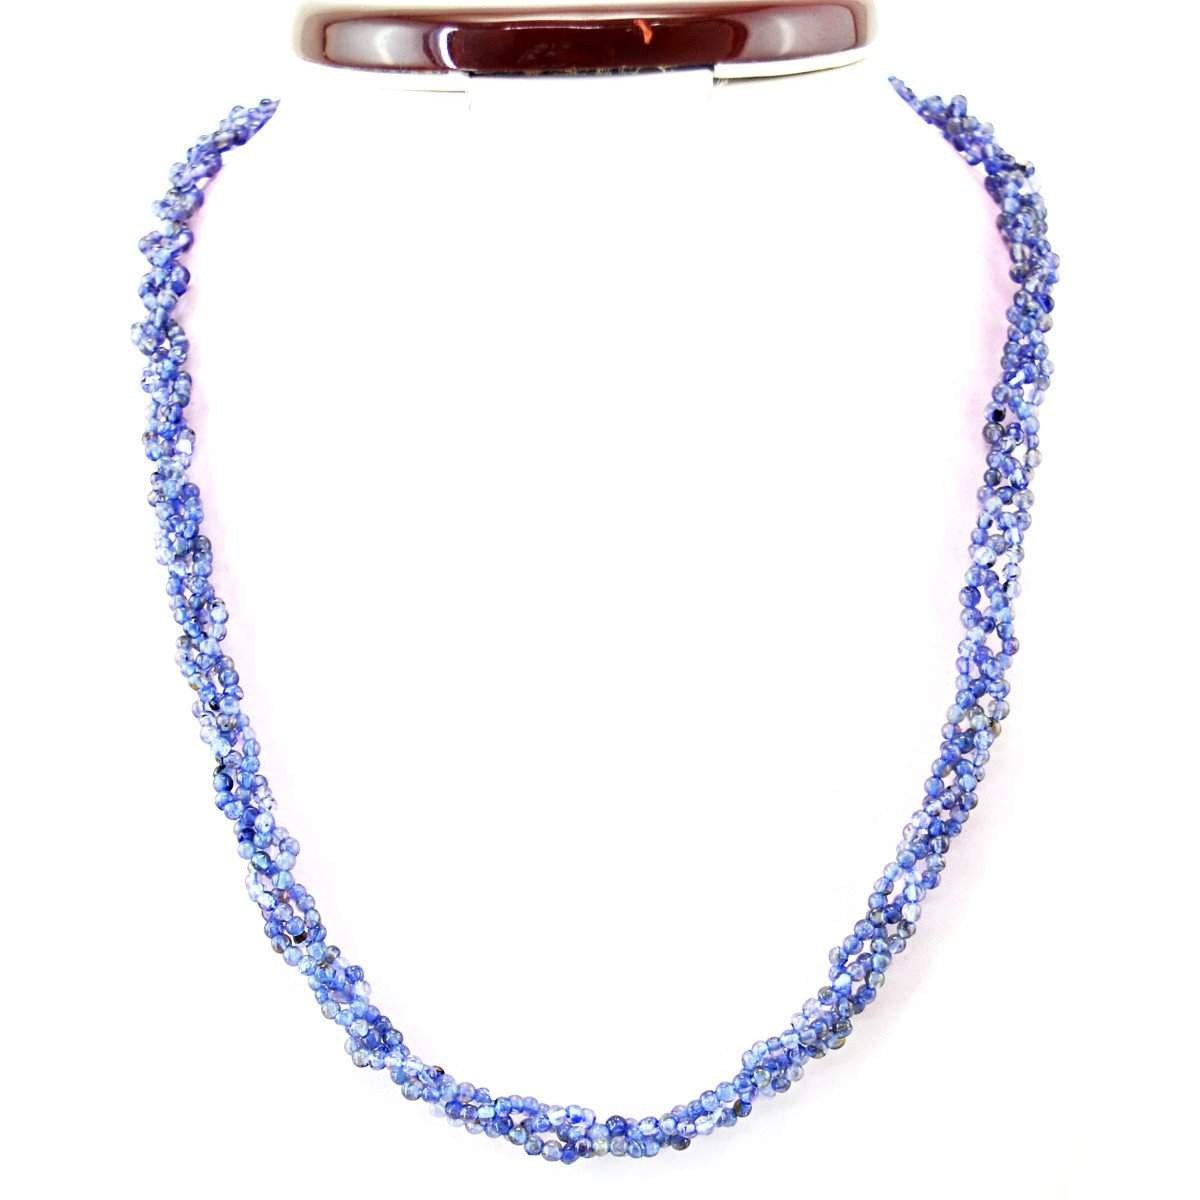 gemsmore:Natural Blue Tanzanite Necklace 20 Inches Long Untreated Round Beads